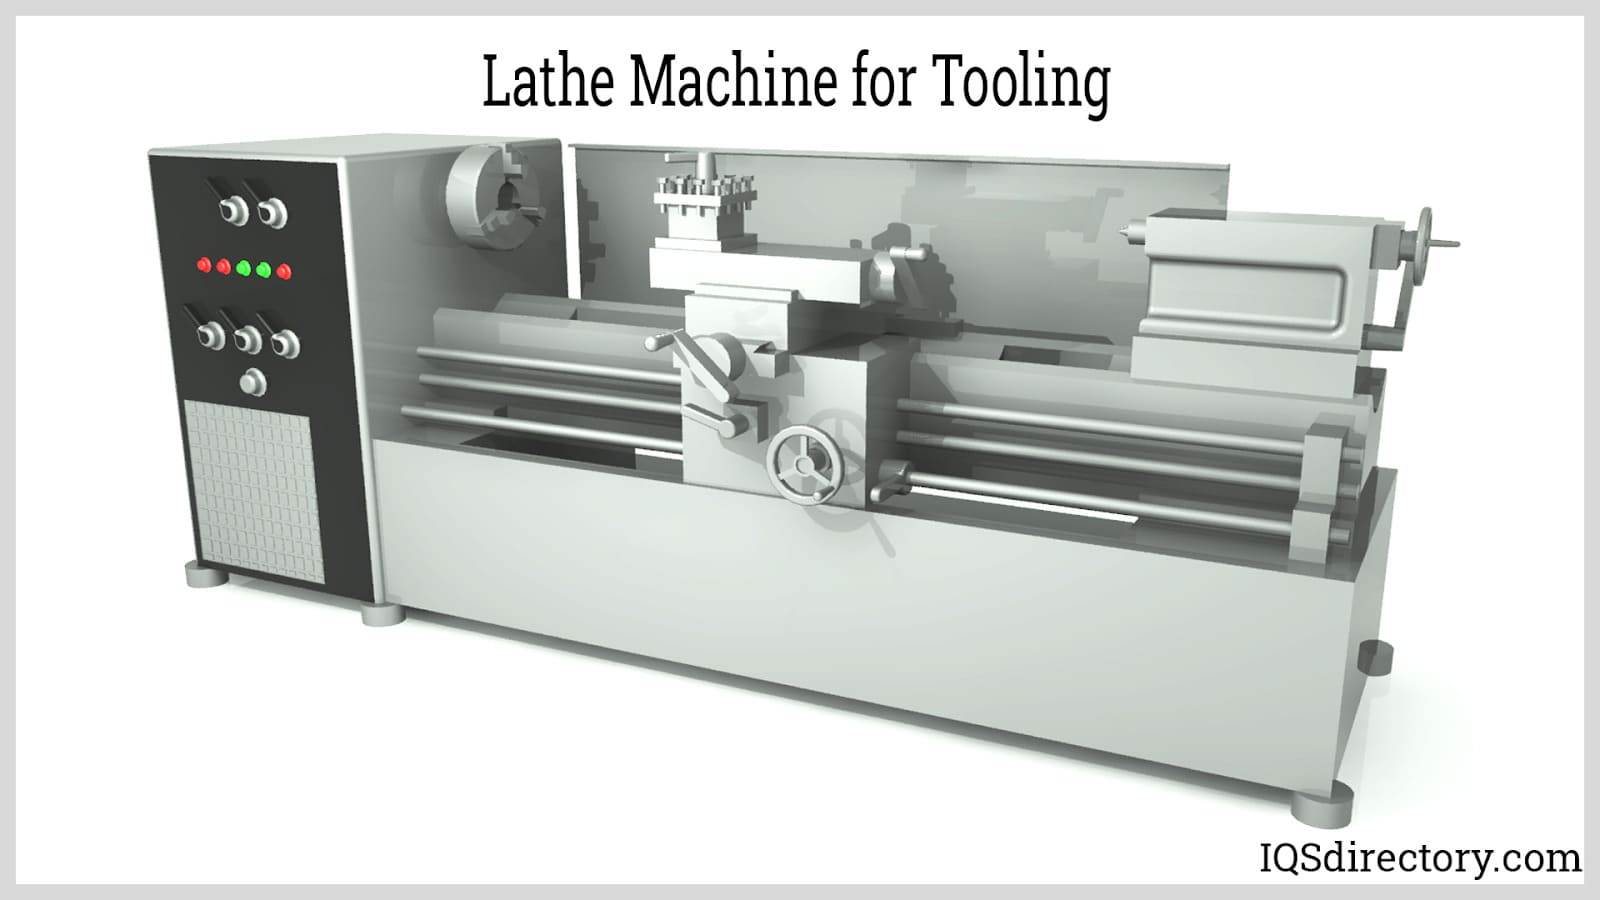 Lathe Machine for Tooling